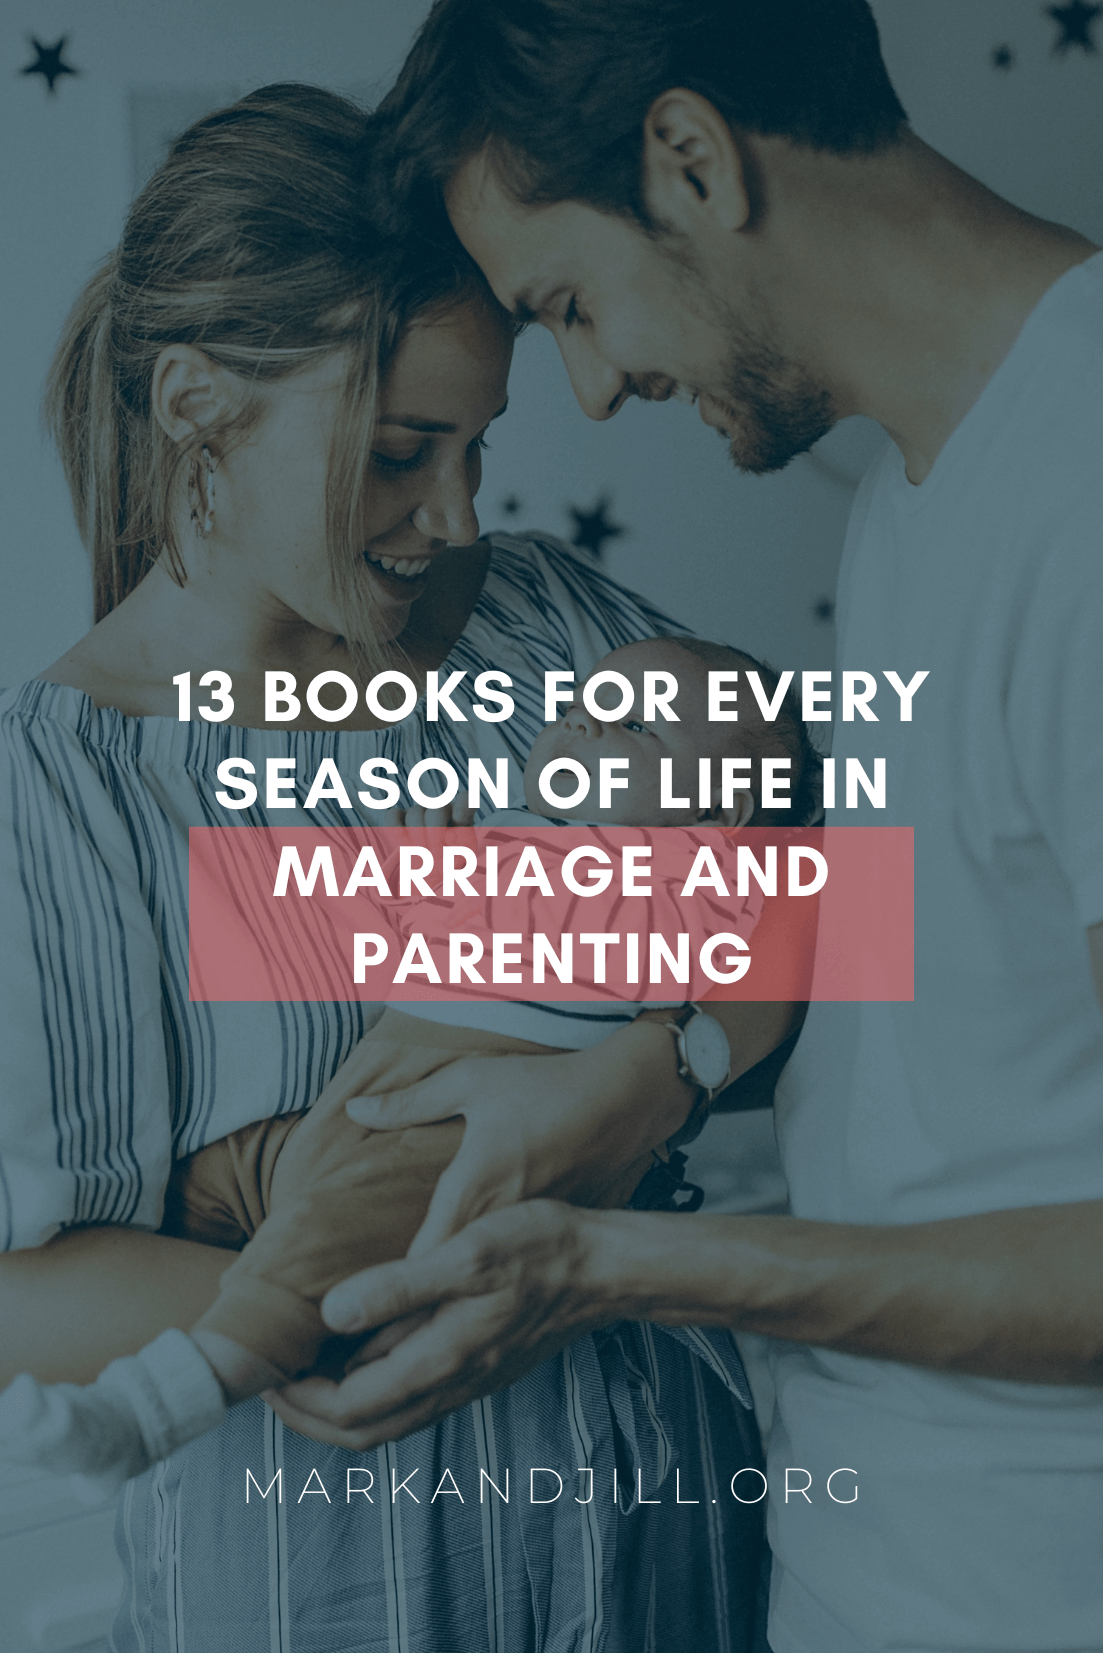 13 Books for Every Season of Life in Marriage and Parenting